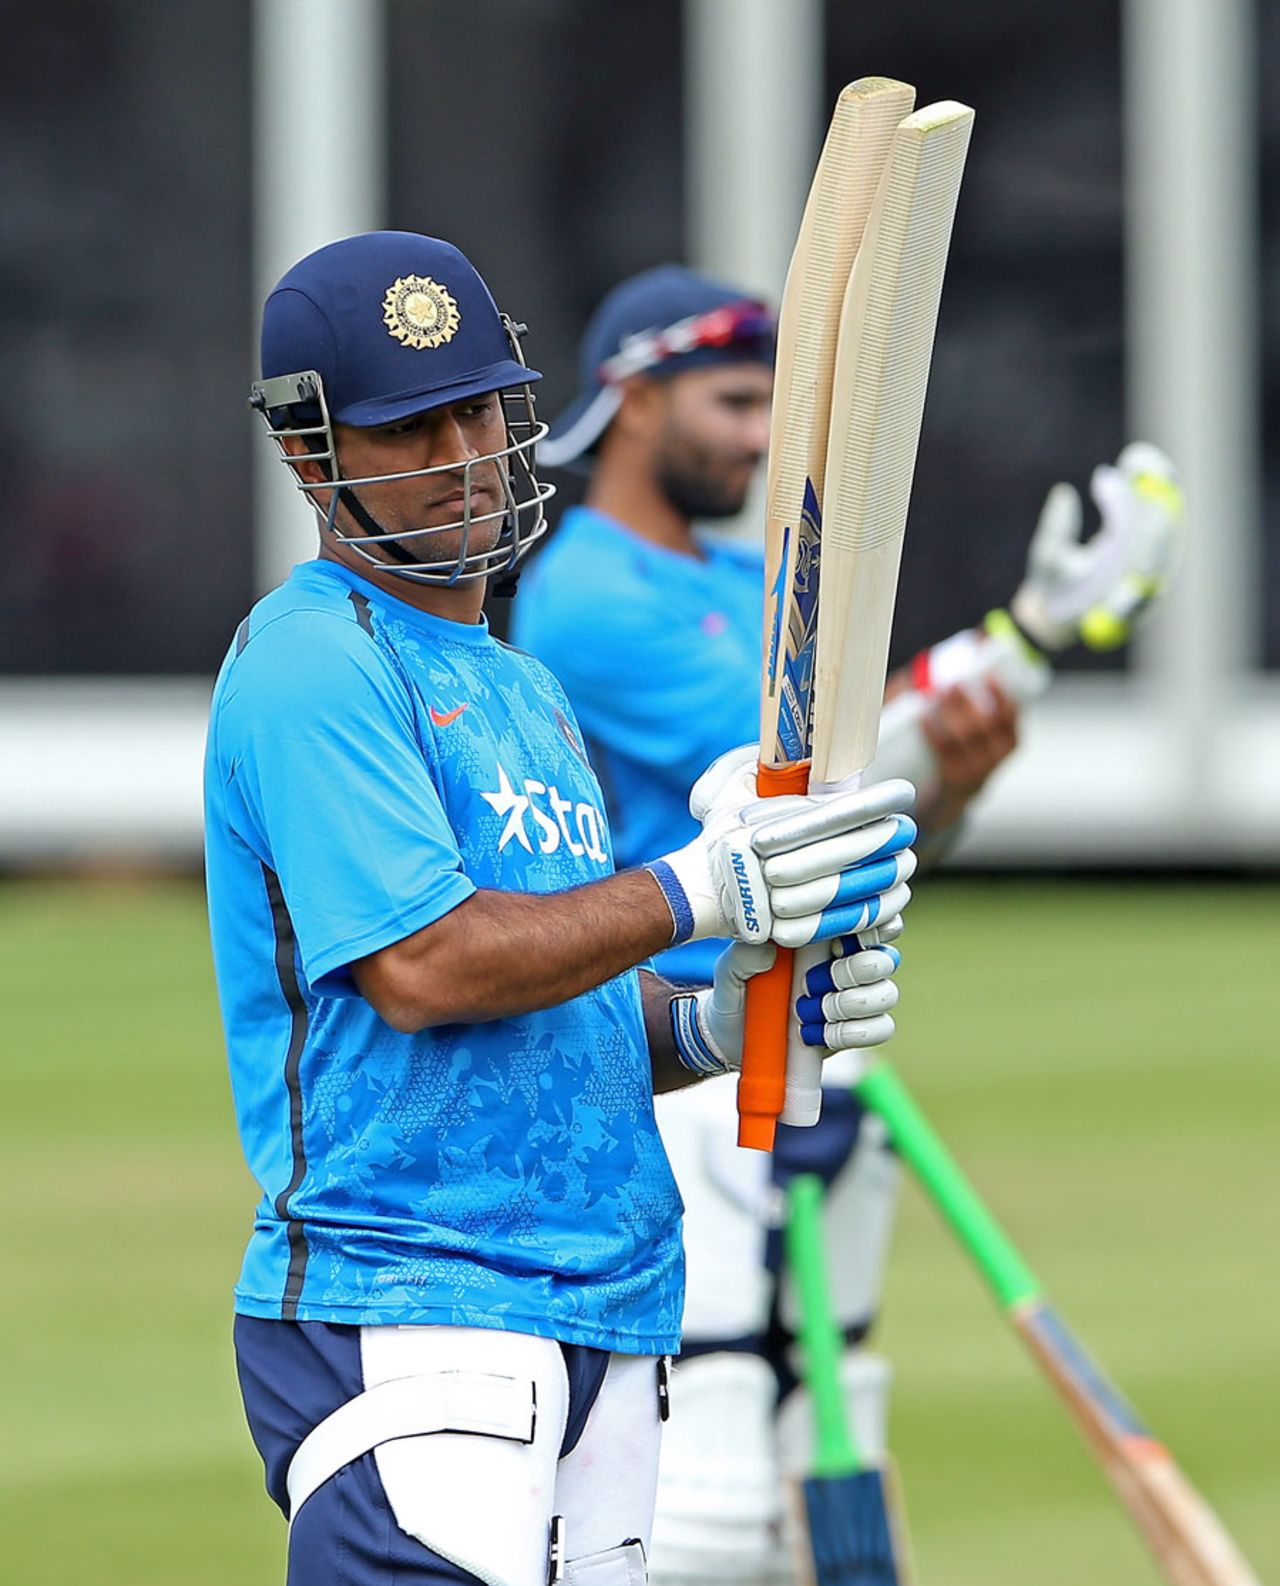 MS Dhoni examines his bat during a nets session, Lord's, July 15, 2014